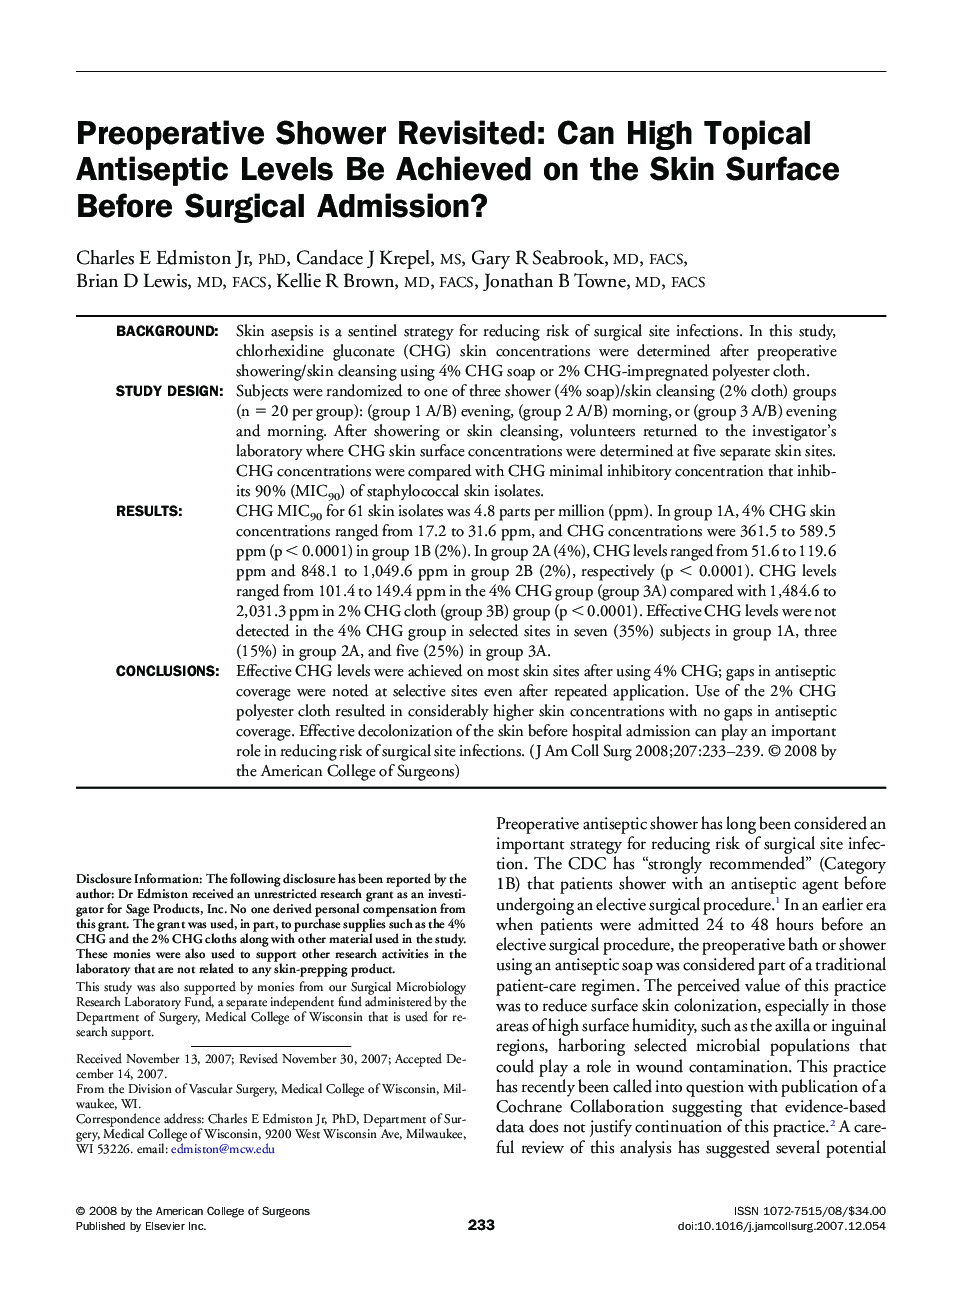 Preoperative Shower Revisited: Can High Topical Antiseptic Levels Be Achieved on the Skin Surface Before Surgical Admission? 